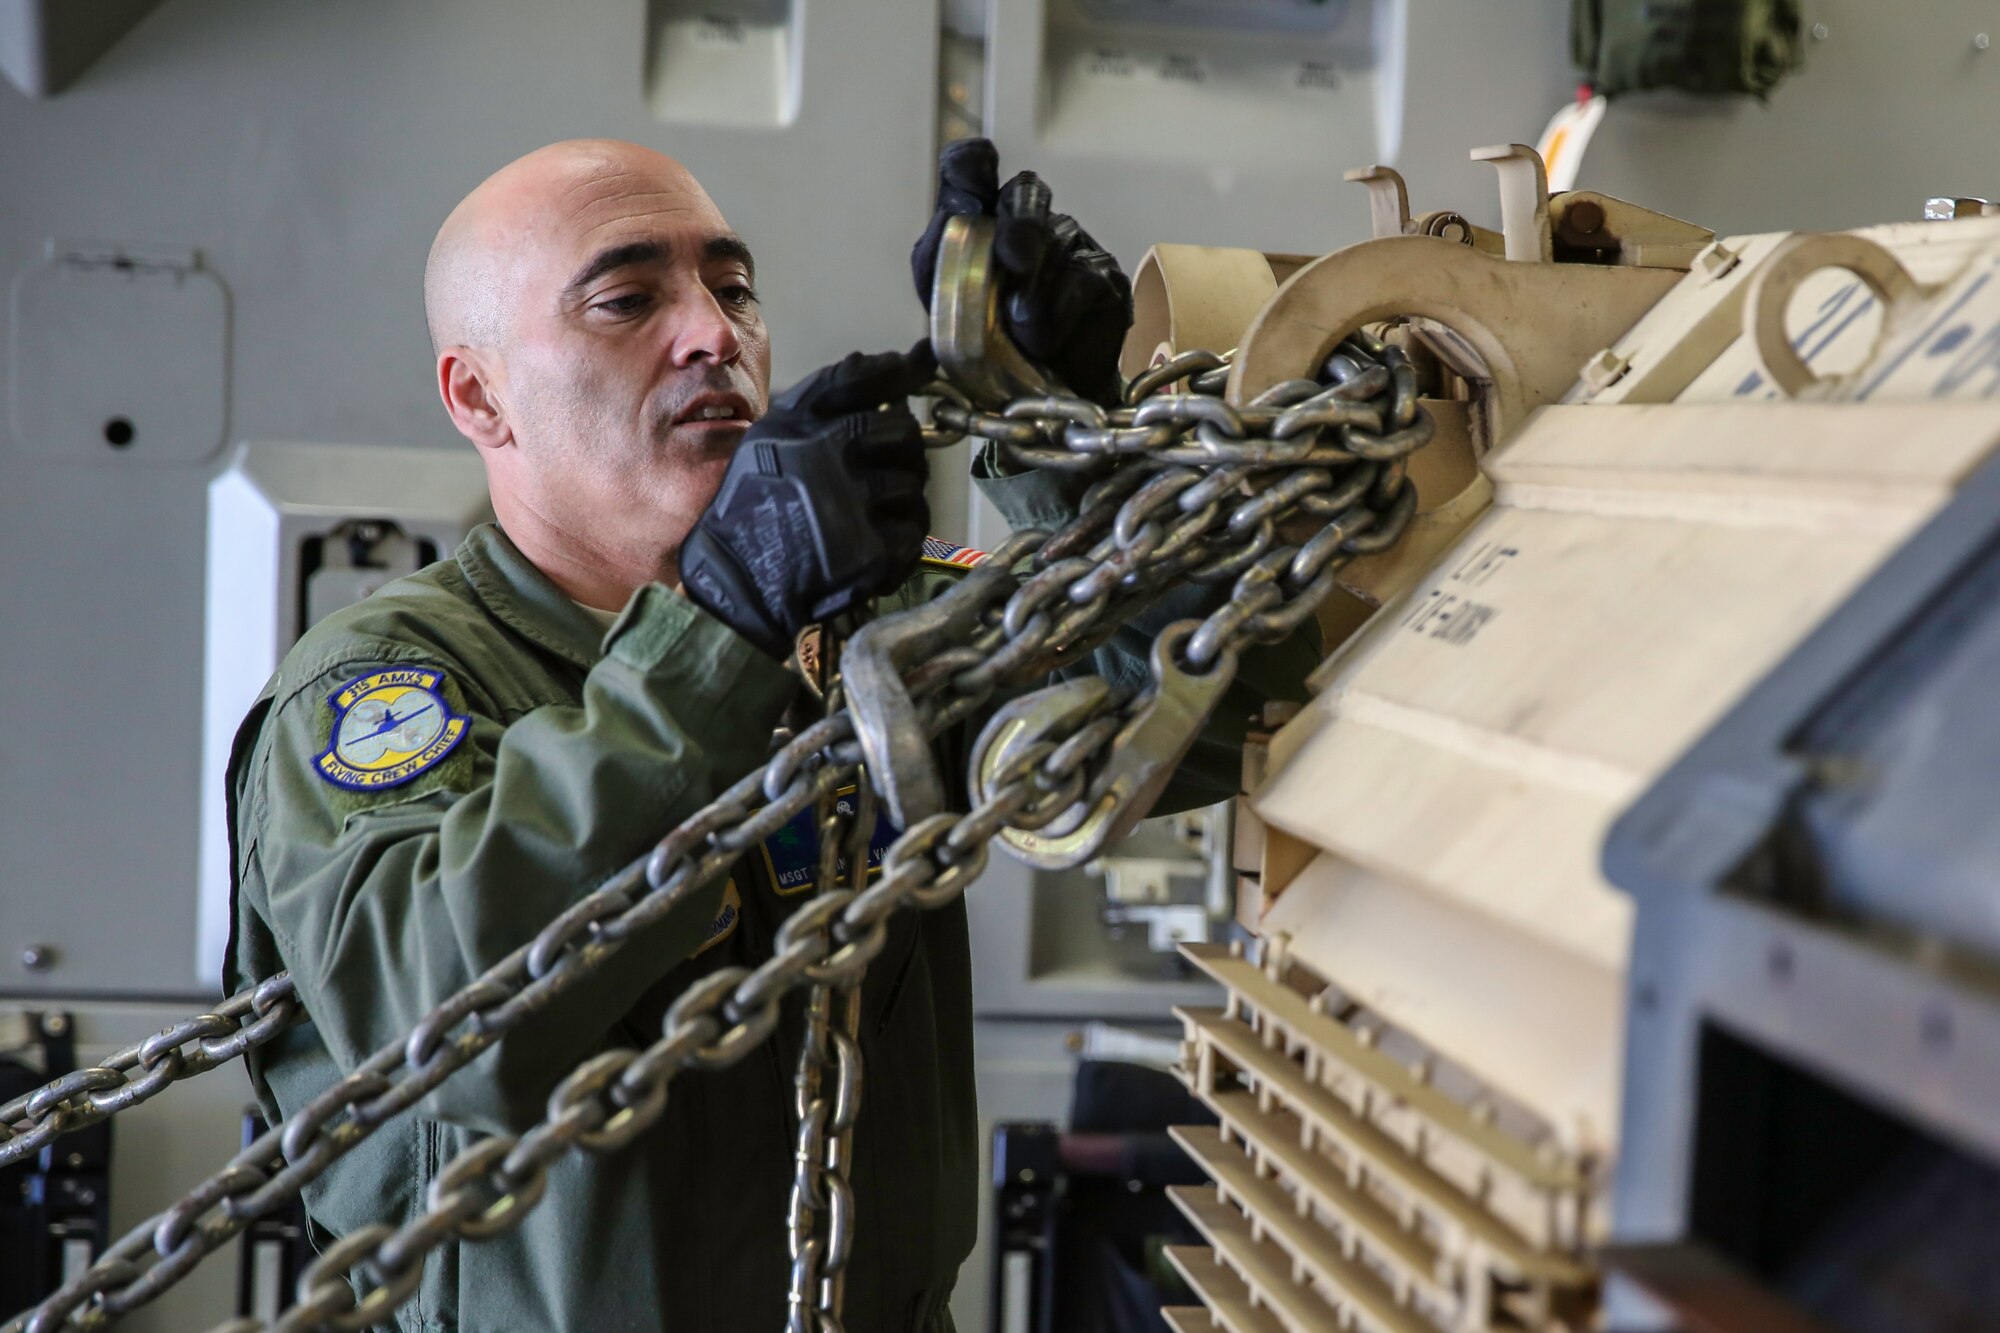 Master Sgt. Edwin Del Valle attaches a tie-down chain on a an Abrams M1A2 tank in the cargo compartment of a C-17 Globemaster III Dec. 11, 2014 at North Air Force Auxiliary Field in North, S.C. The tank movement was part of a two-day exercise which integrated C-17 air and ground crew training for 315th Airlift Wing Airmen stationed at Joint Base Charleston, S.C. as well as Soldiers from one of the 3rd Infantry Division’s Immediate Ready Companies stationed at Fort Stewart, Ga. Four C-17’s were used during the exercise to deploy and redeploy two Abrams M1A2 tanks, an M88 recovery vehicle and two M2A3 Bradley Fighting Vehicles. Del Valle is a flying crew chief at JBC. (U.S. Air Force photo by Tech. Sgt. Shane Ellis)